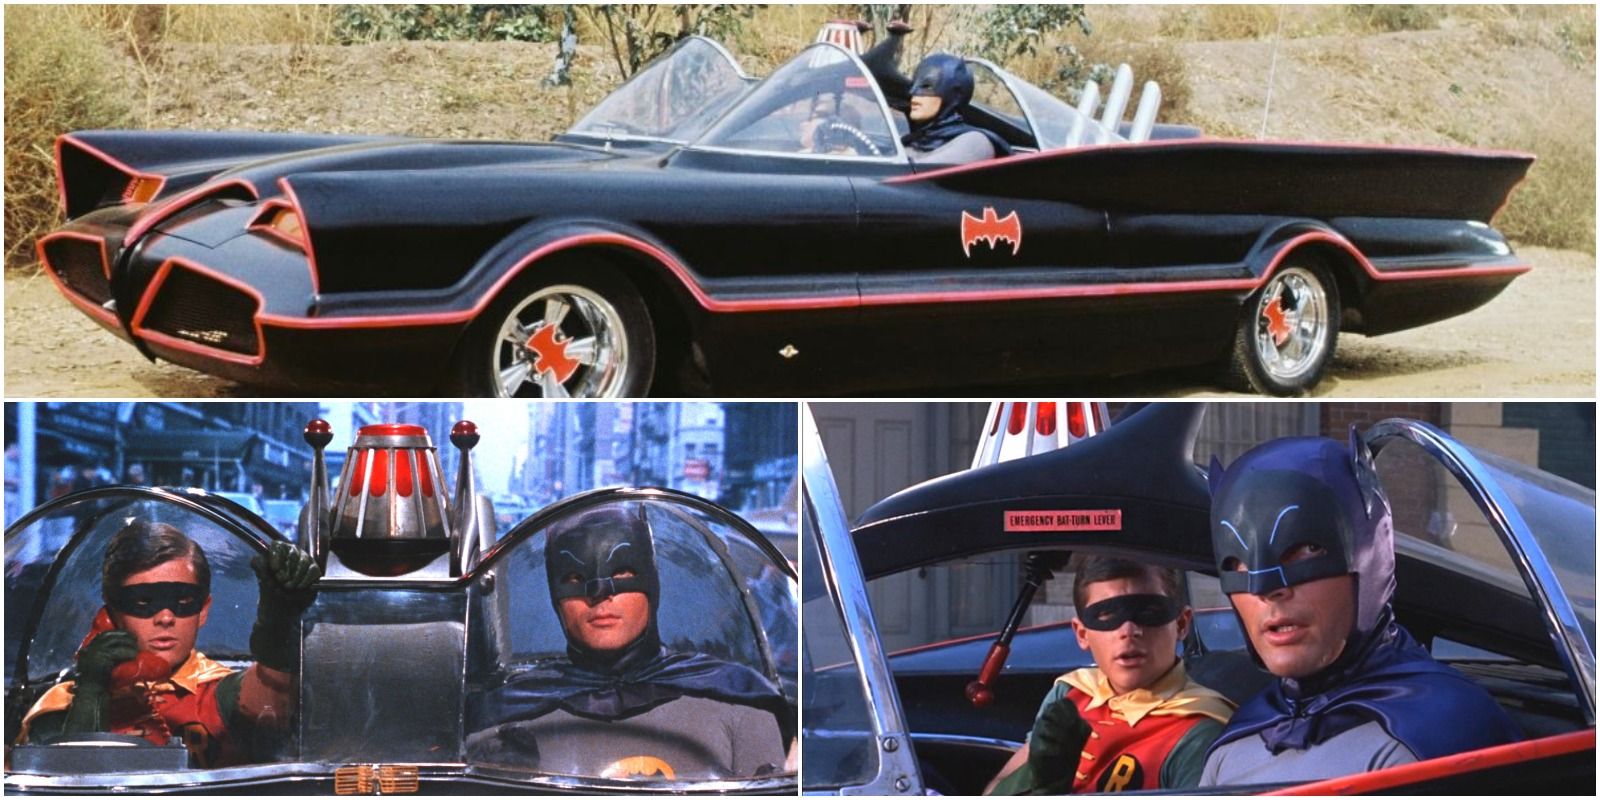 Adam West's Batman Riding the Batmobile with Robin from the 1966 Show